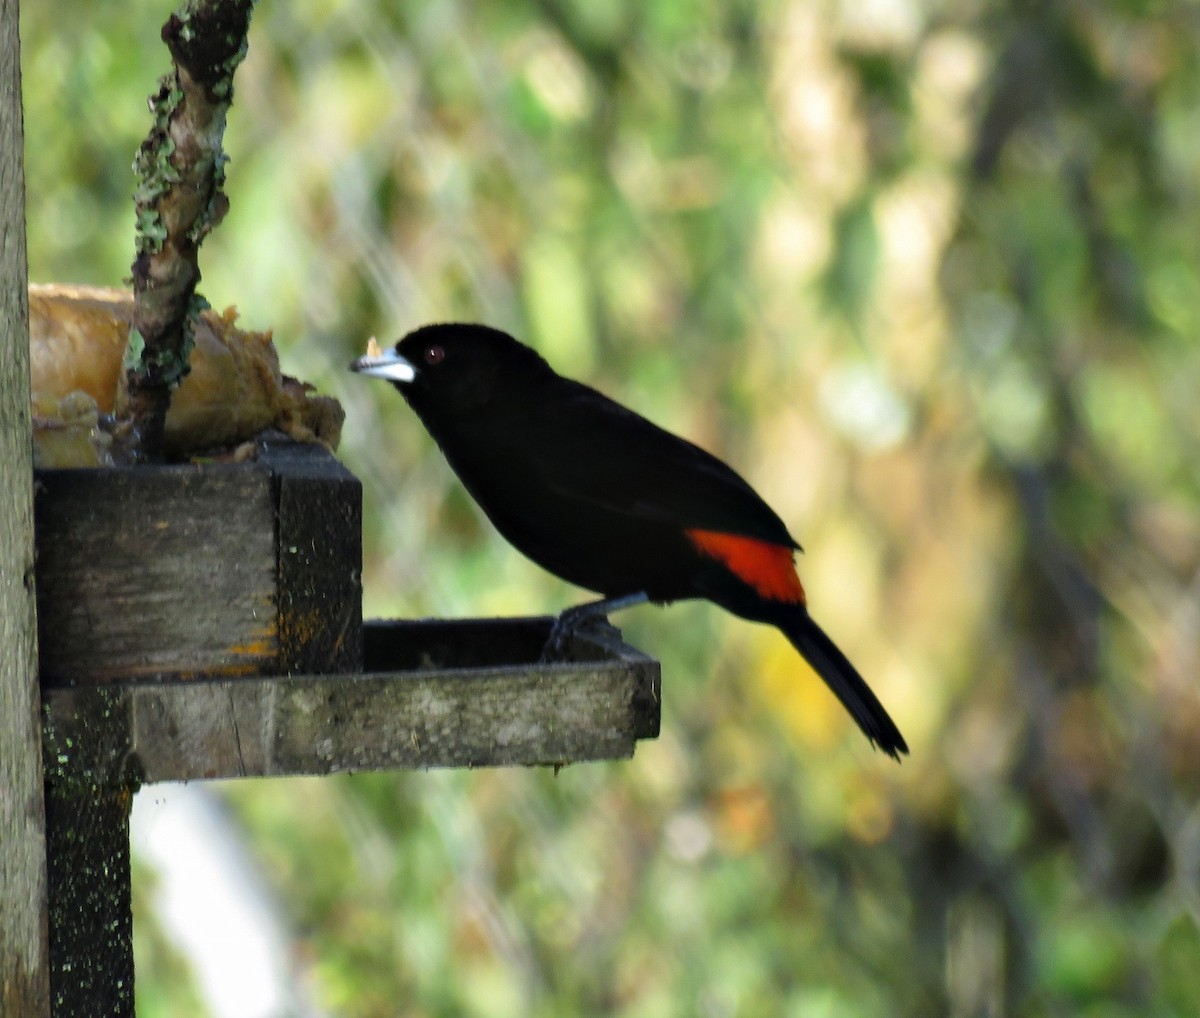 Flame-rumped Tanager (Flame-rumped) - Gustavo A. Rodriguez